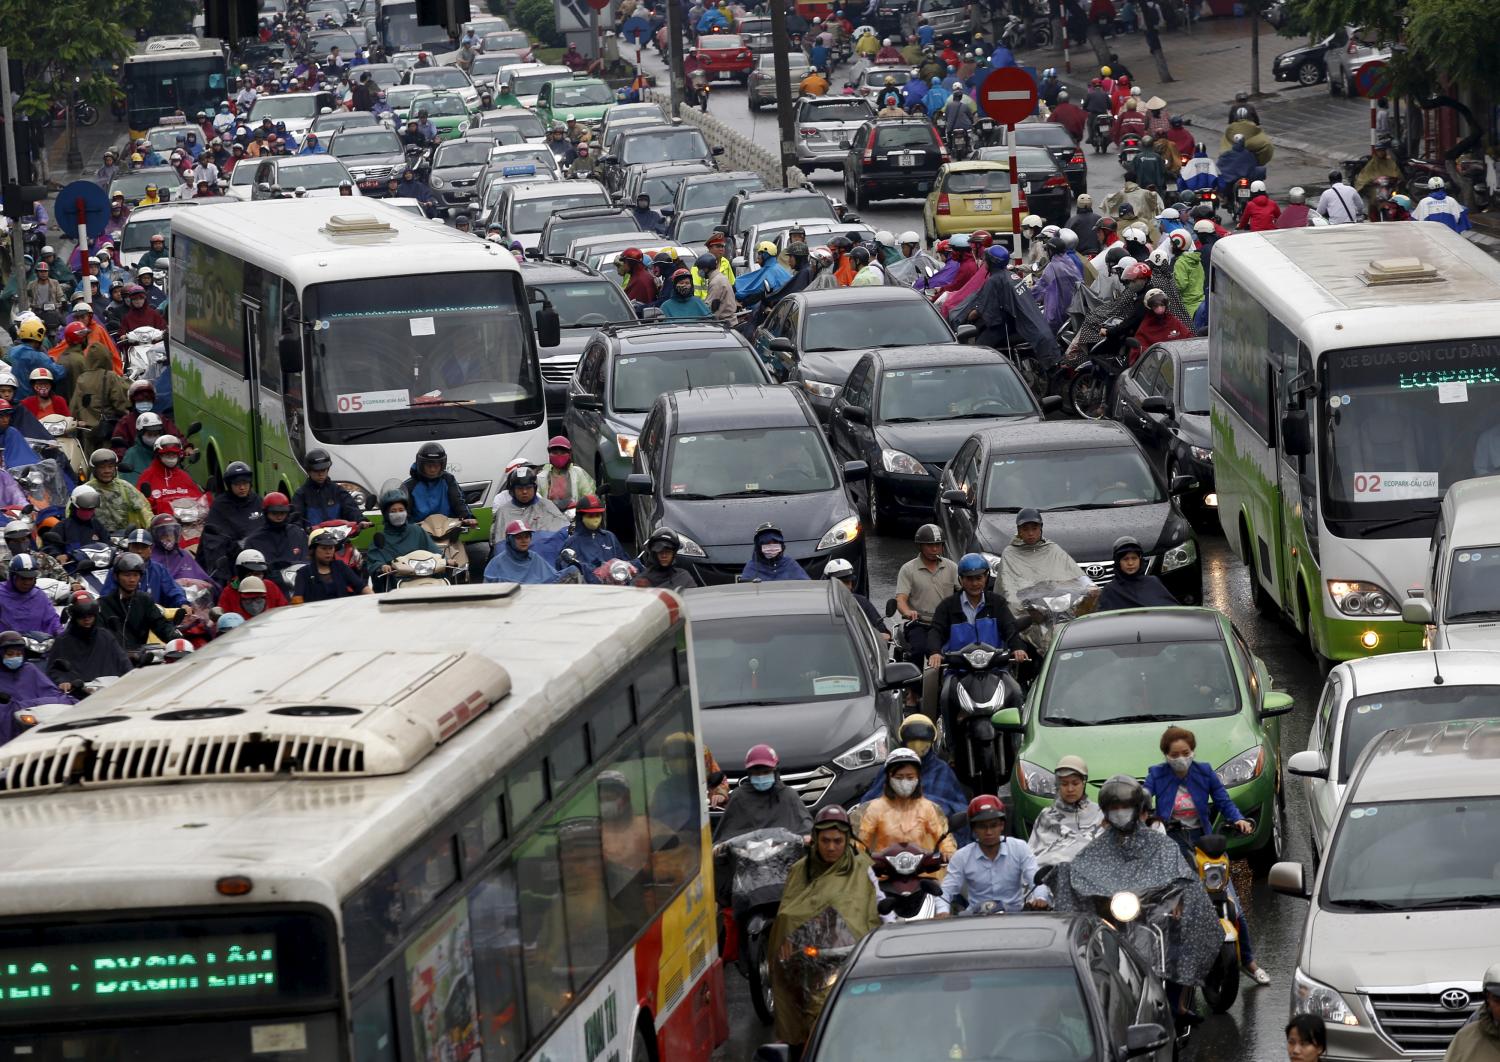 Commuters are seen during rush hour on a street in Hanoi, Vietnam